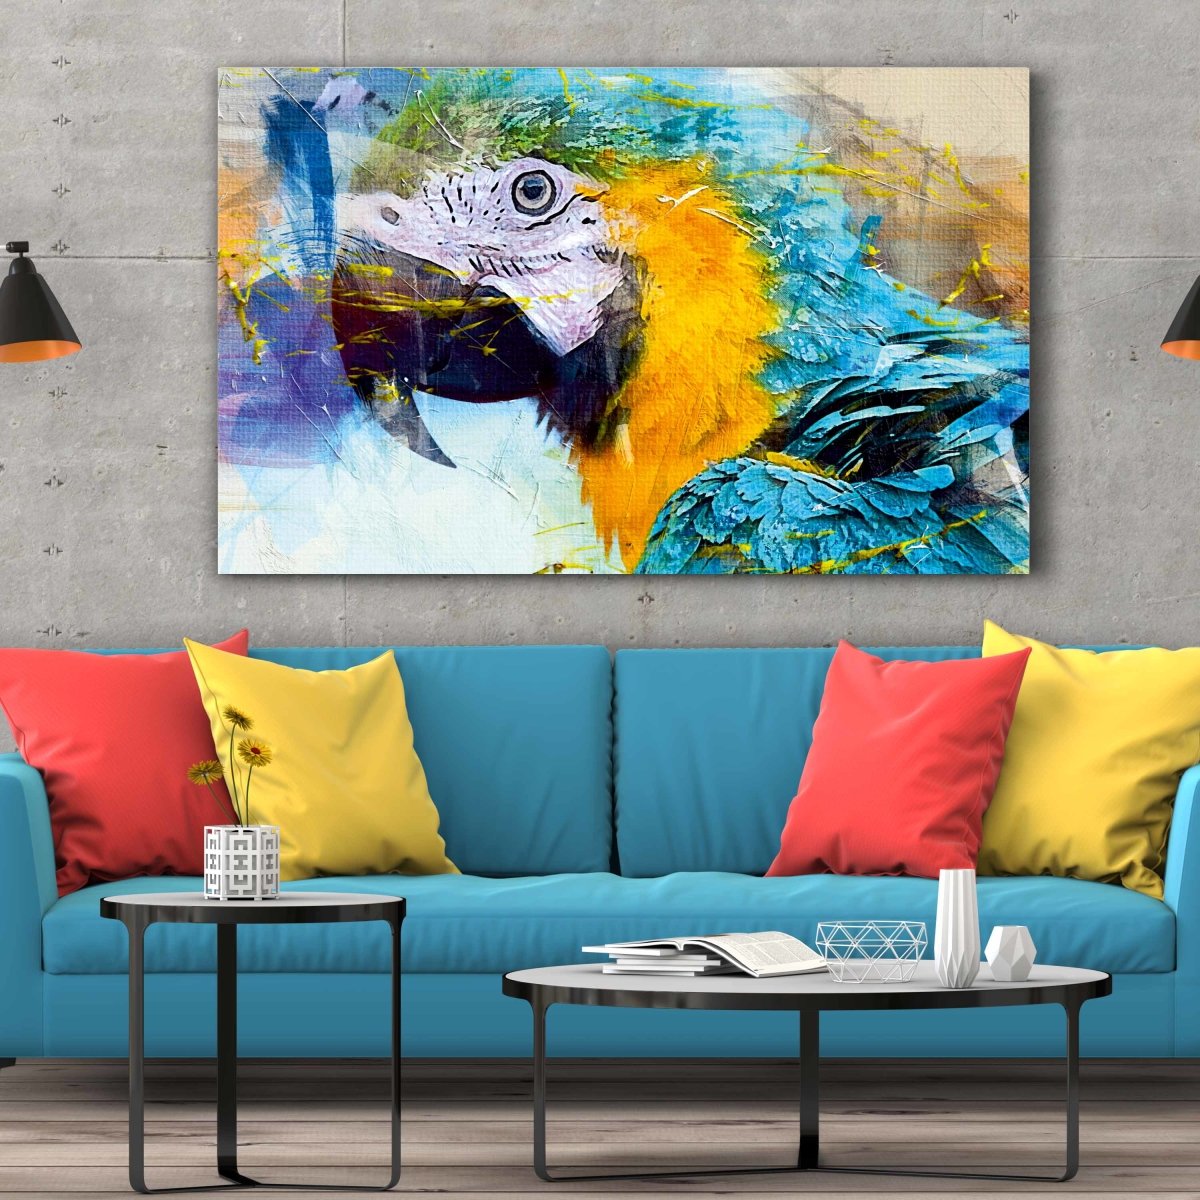 Tablou Canvas Blue Parrot - clevny.ro